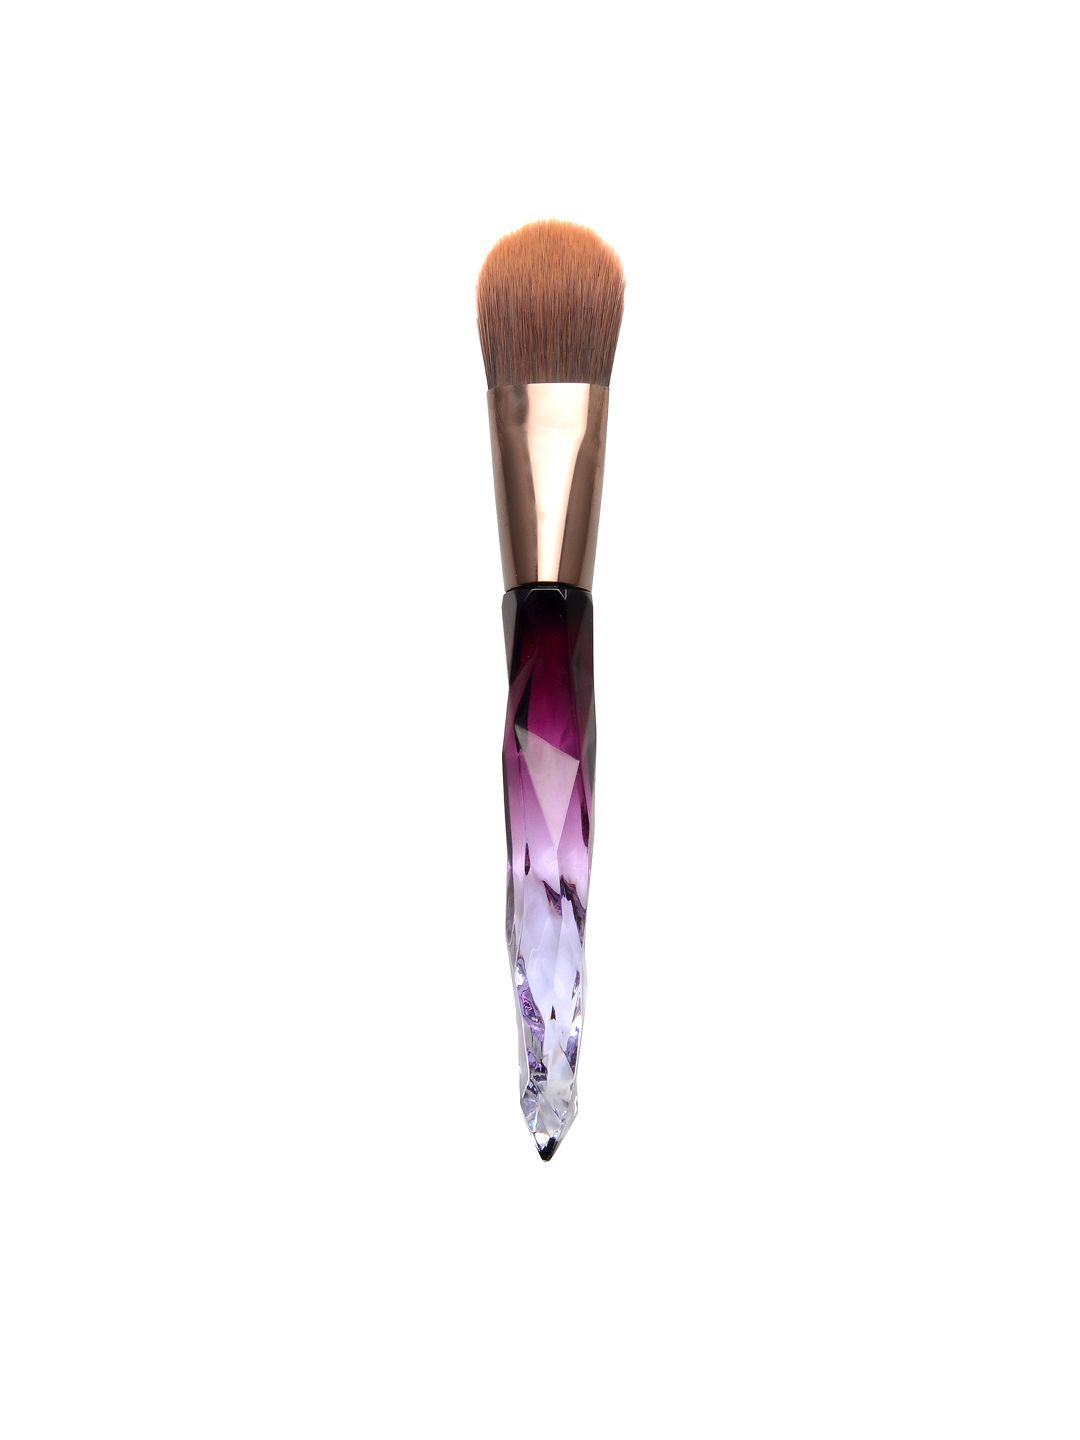 INCOLOR Exposed Makeup Brush Foundation Brush 04 Price in India